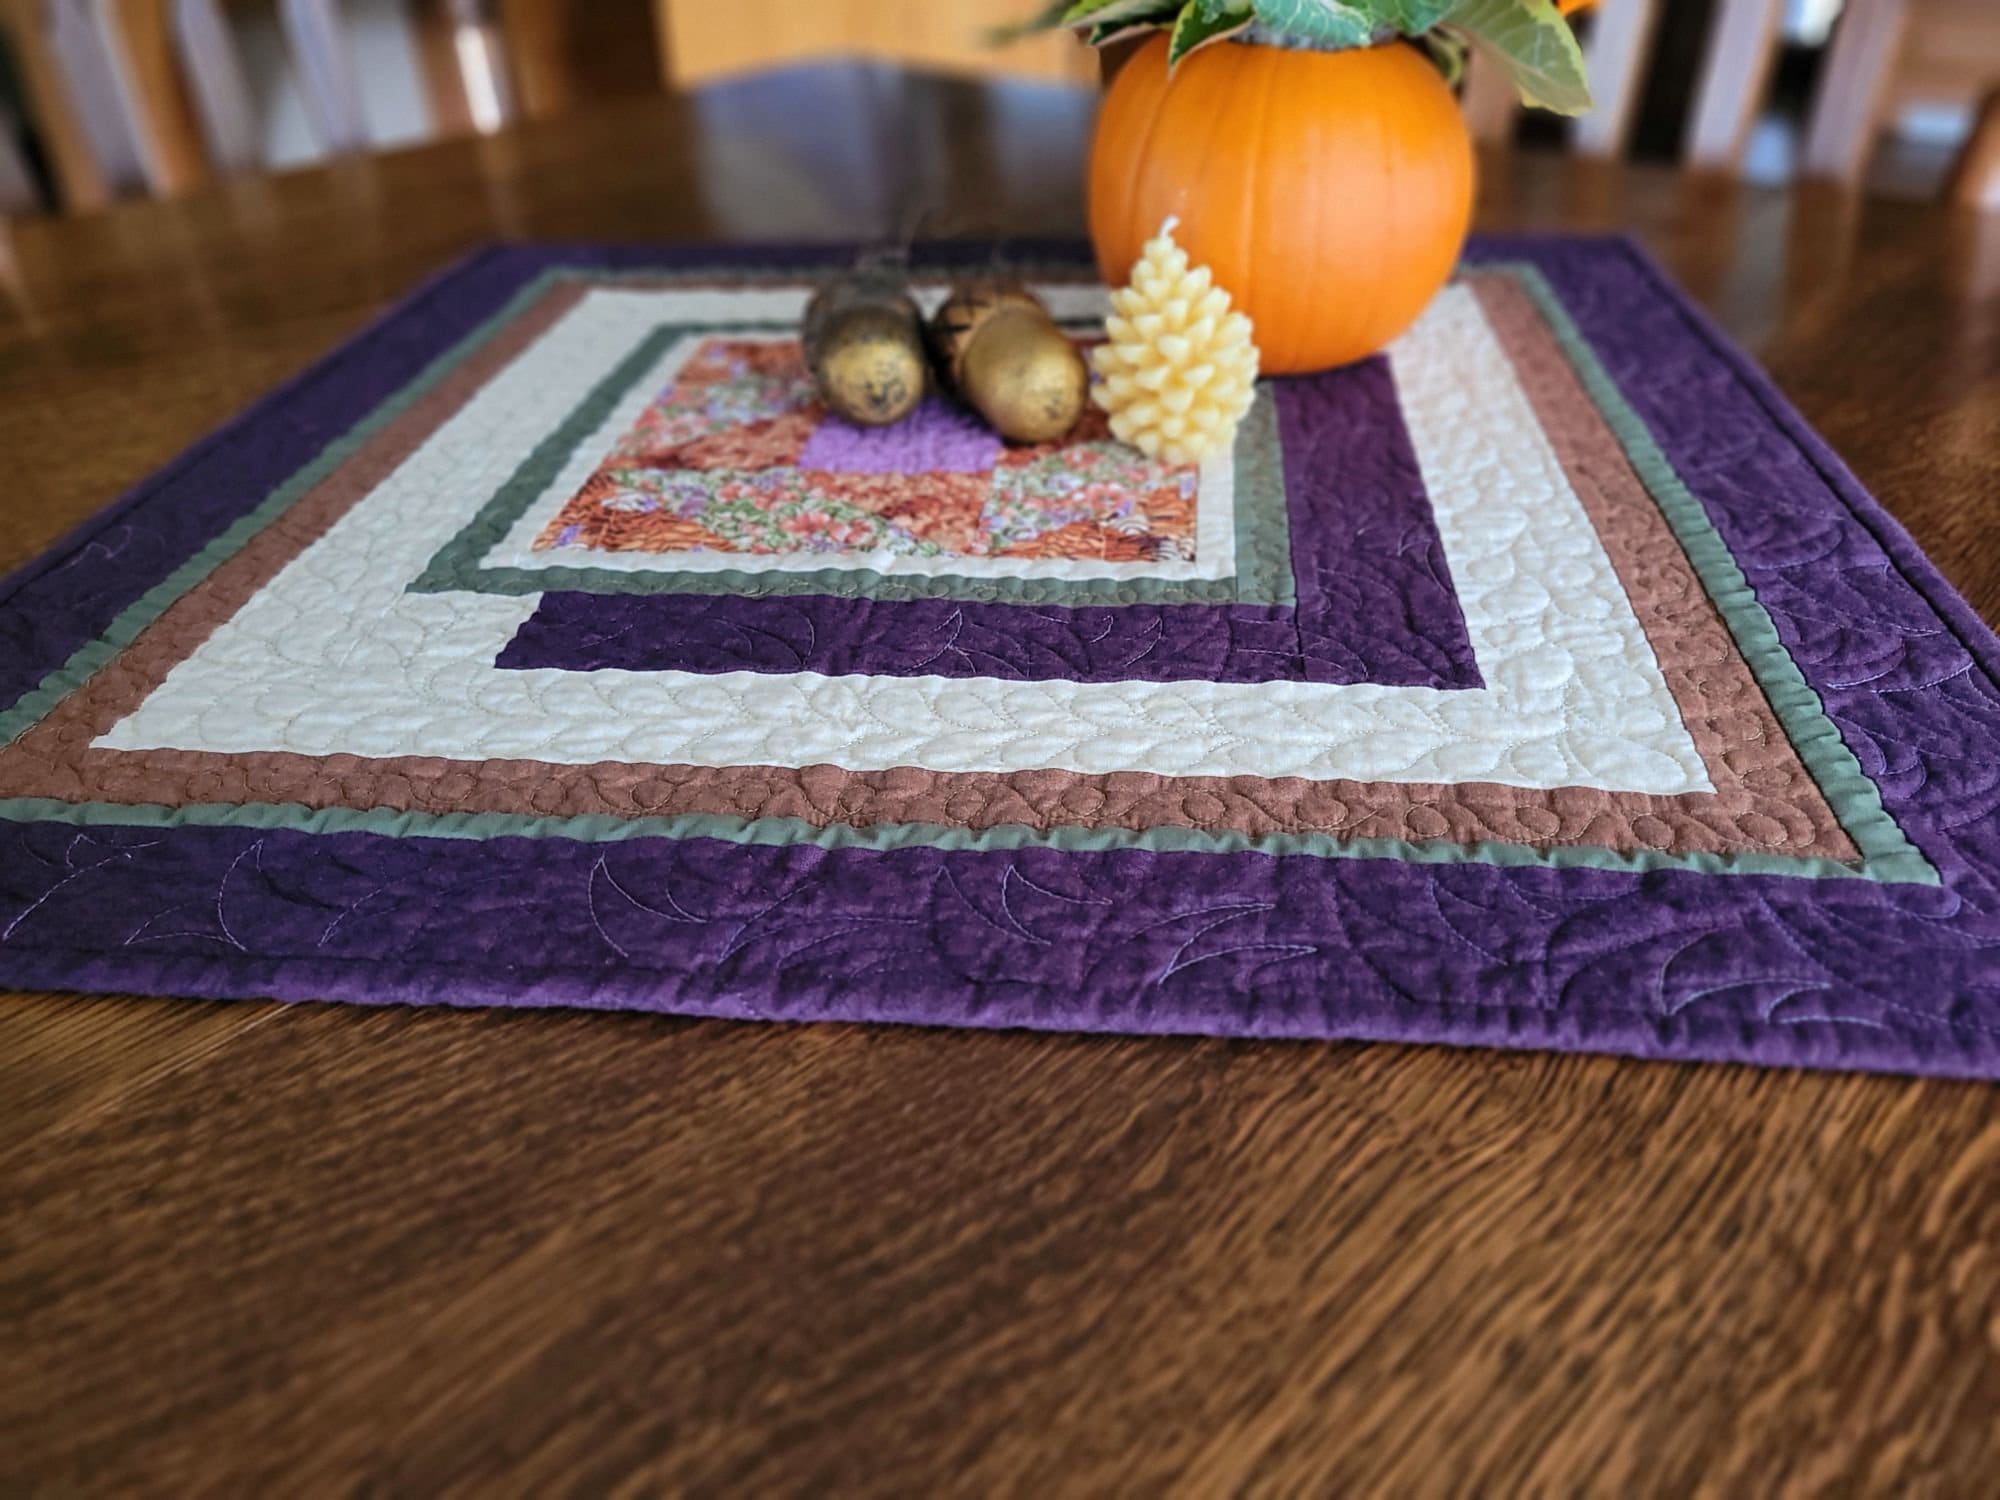 fall table quilt